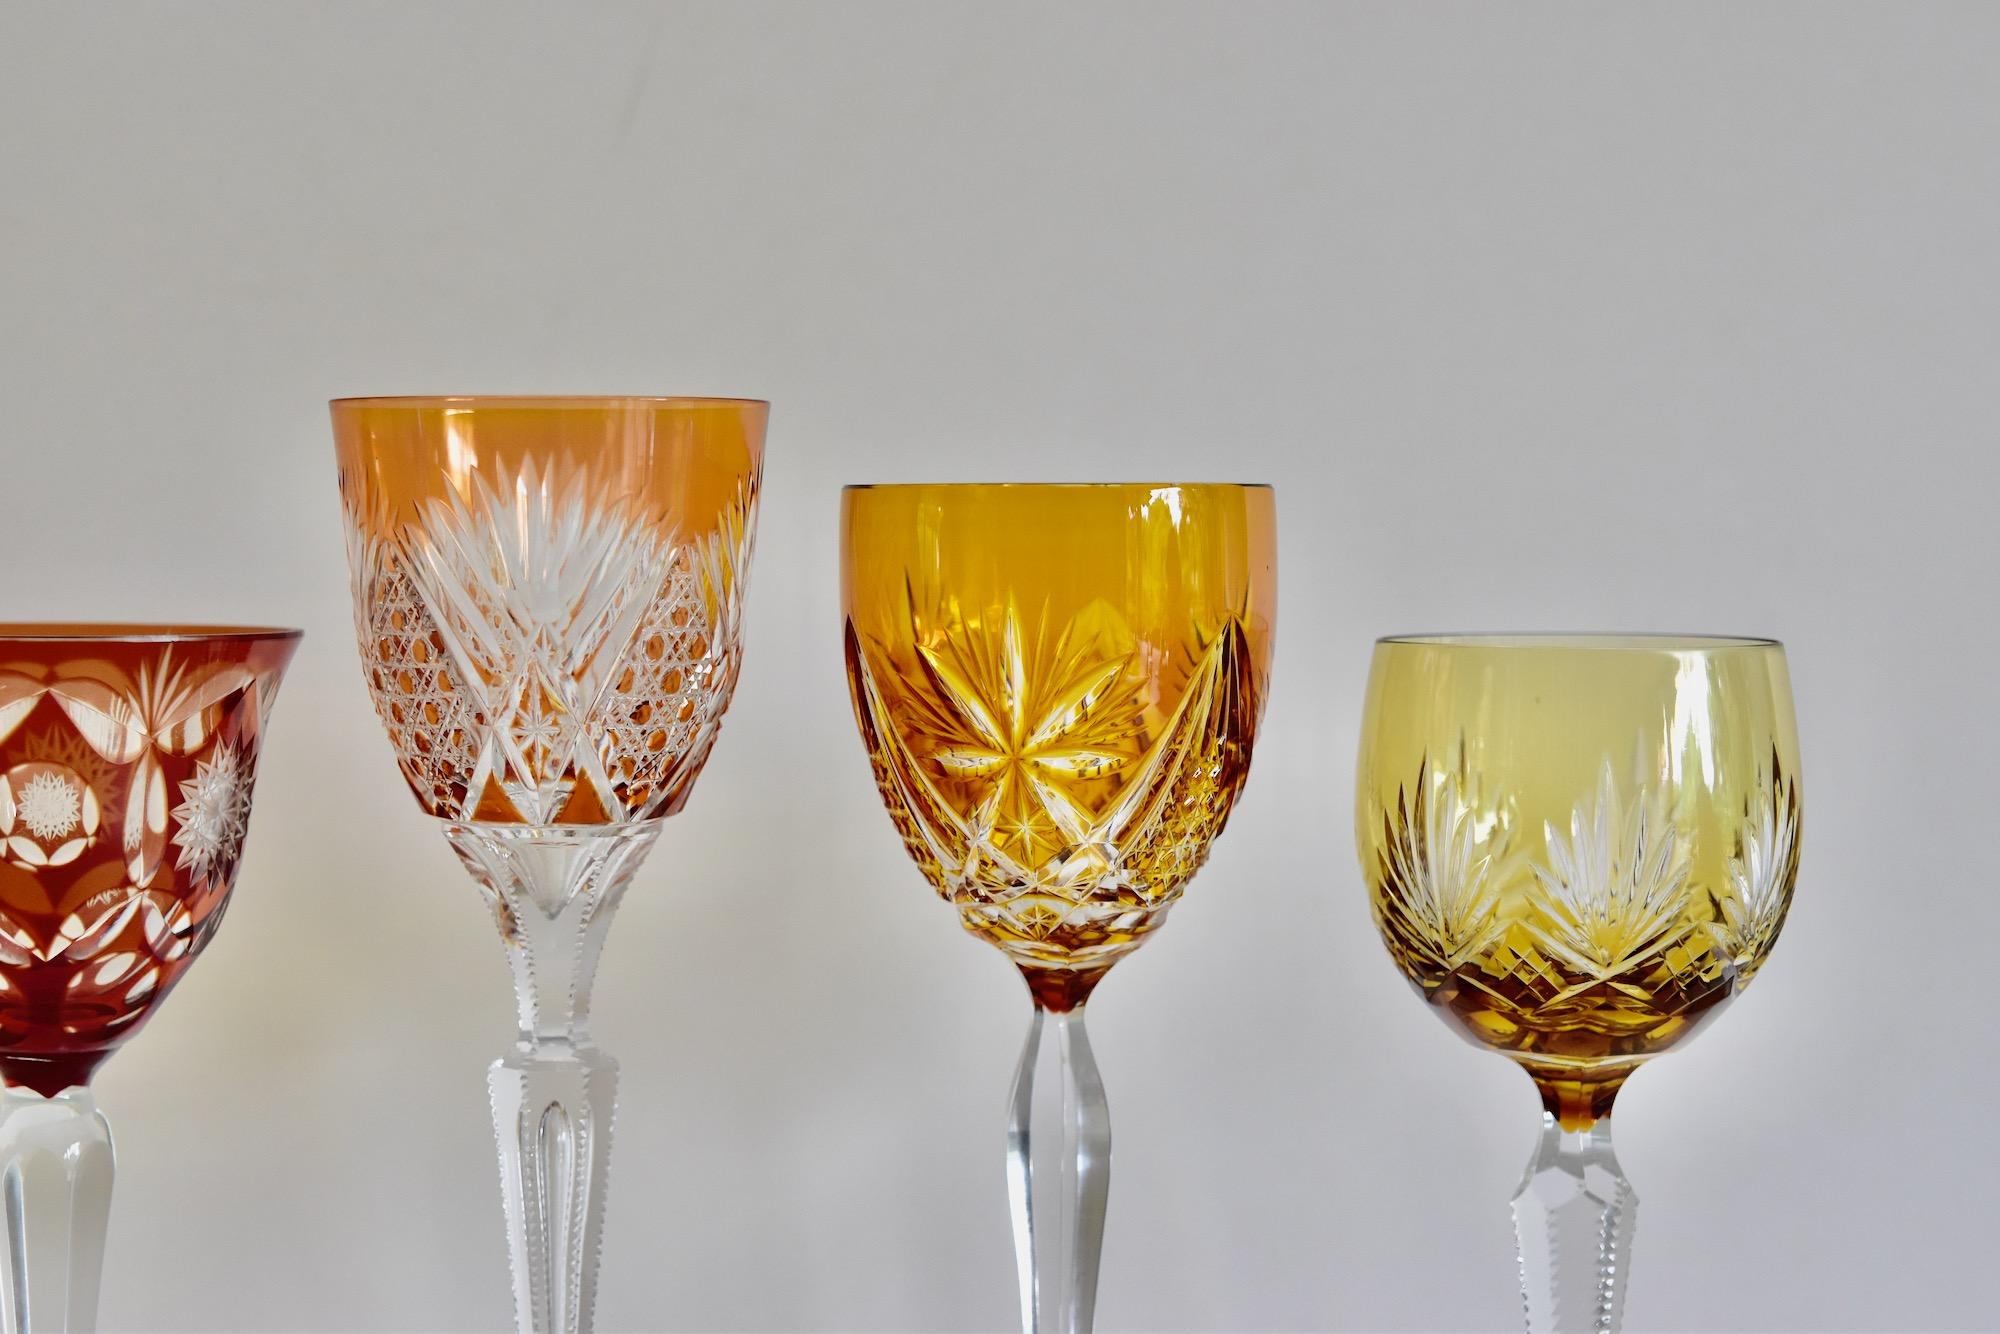 Lot of six antque crystal Bohemian wine glasses. Different in color, shape, cut and size.
Originals from the 1930-1960s. Mouthblown and handcut. No damages, no chips only smal signs of use.

Measurements from diameter 7cm/2.7in and height from